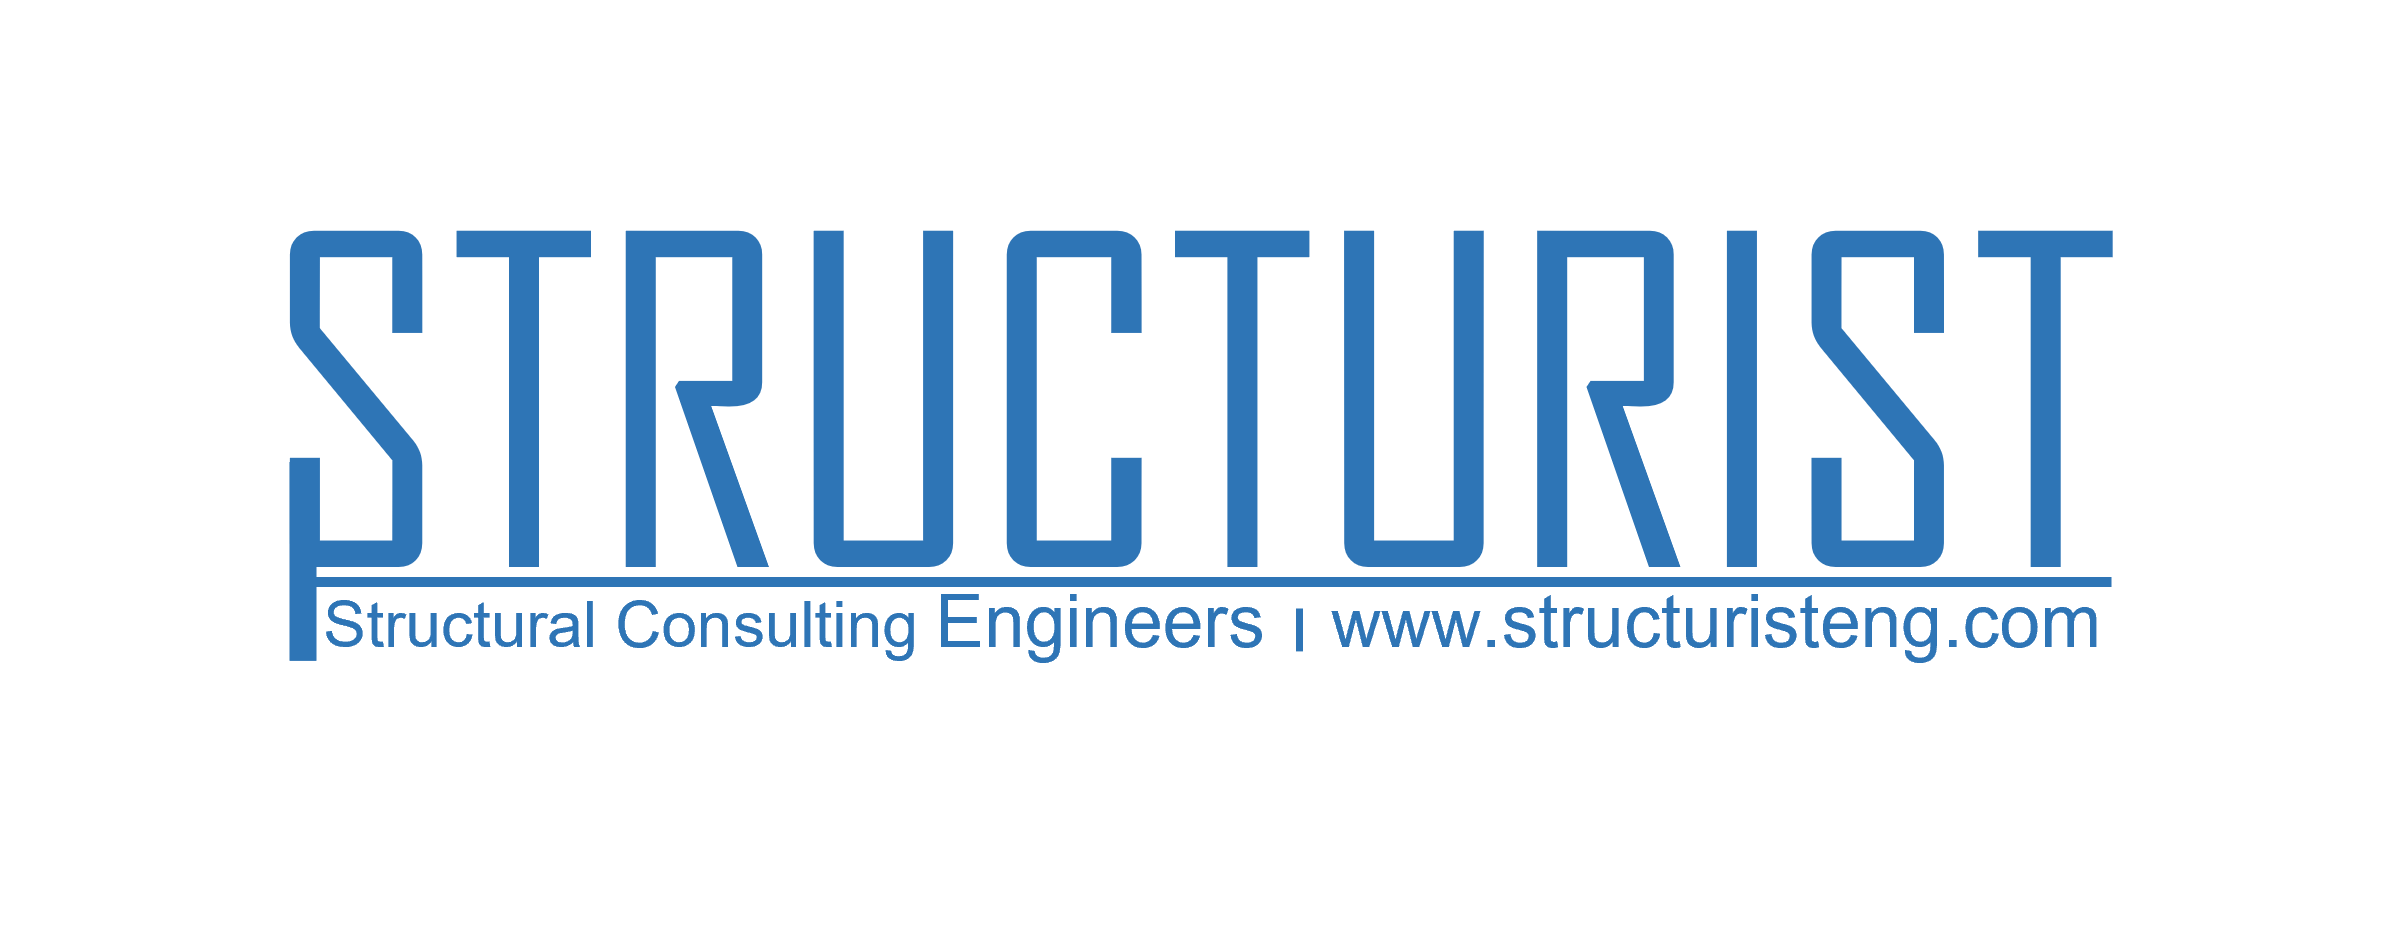 Structurist Consulting Engineers Logo